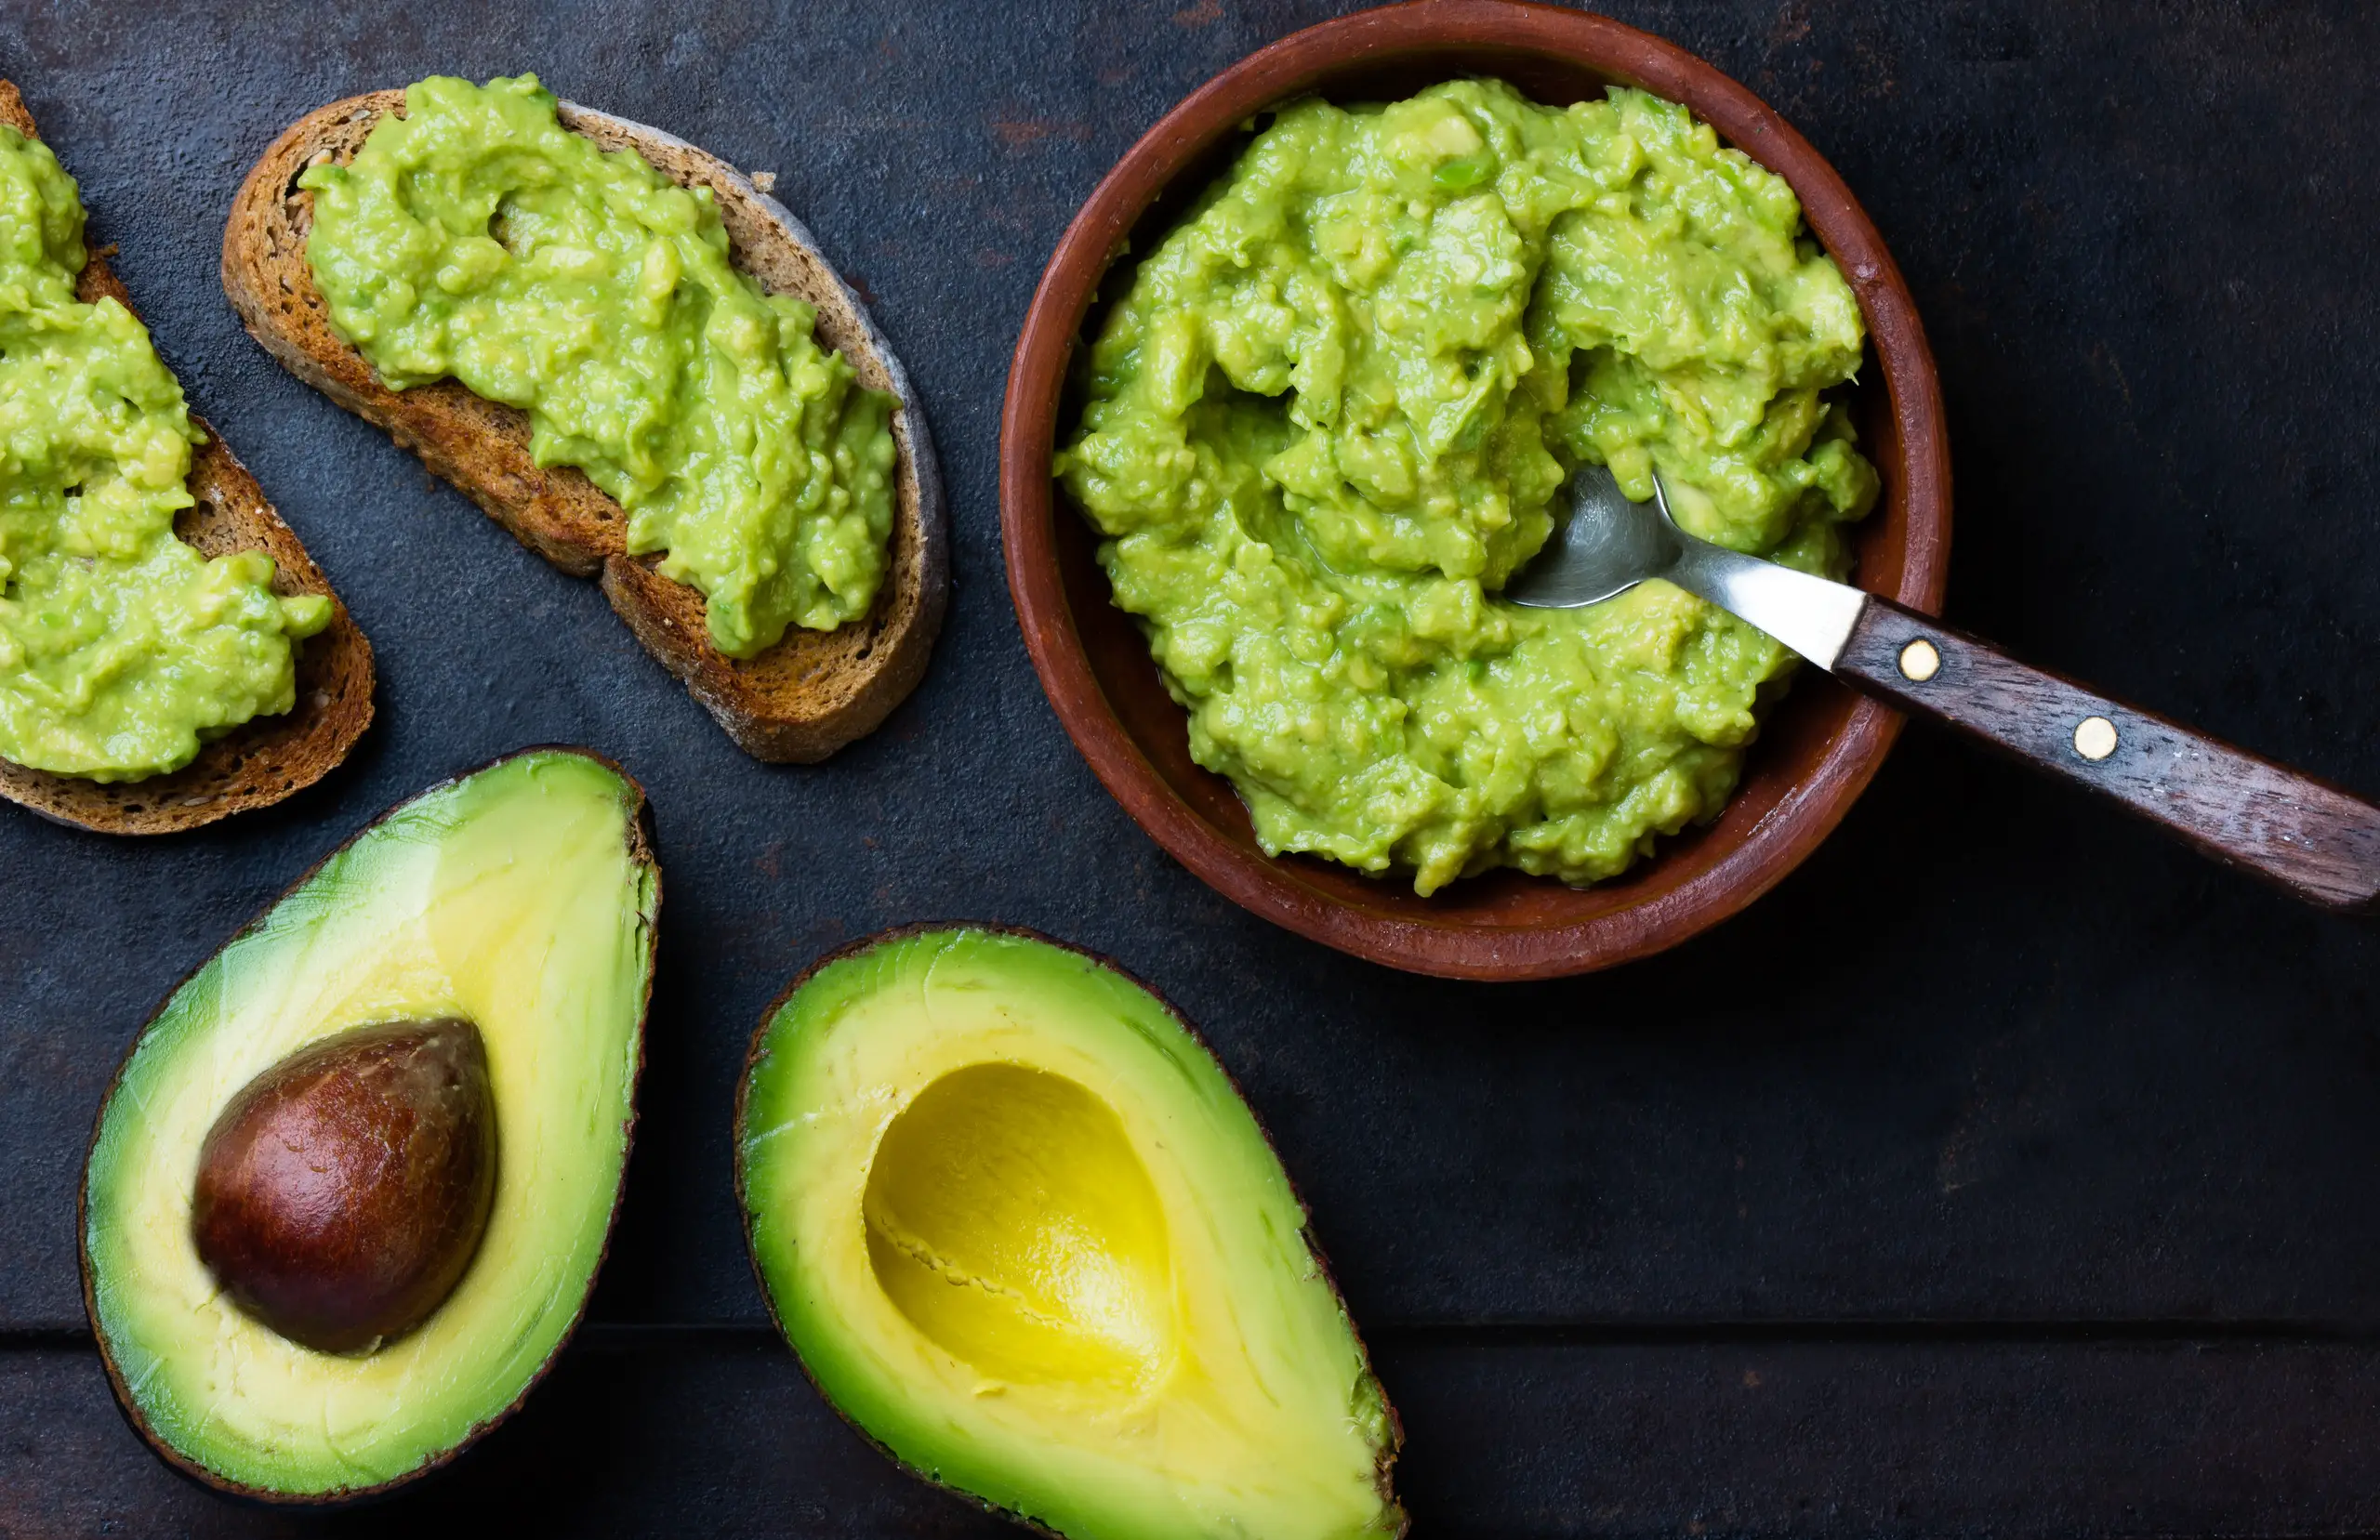 Avocado Improves Vision and Brain Function